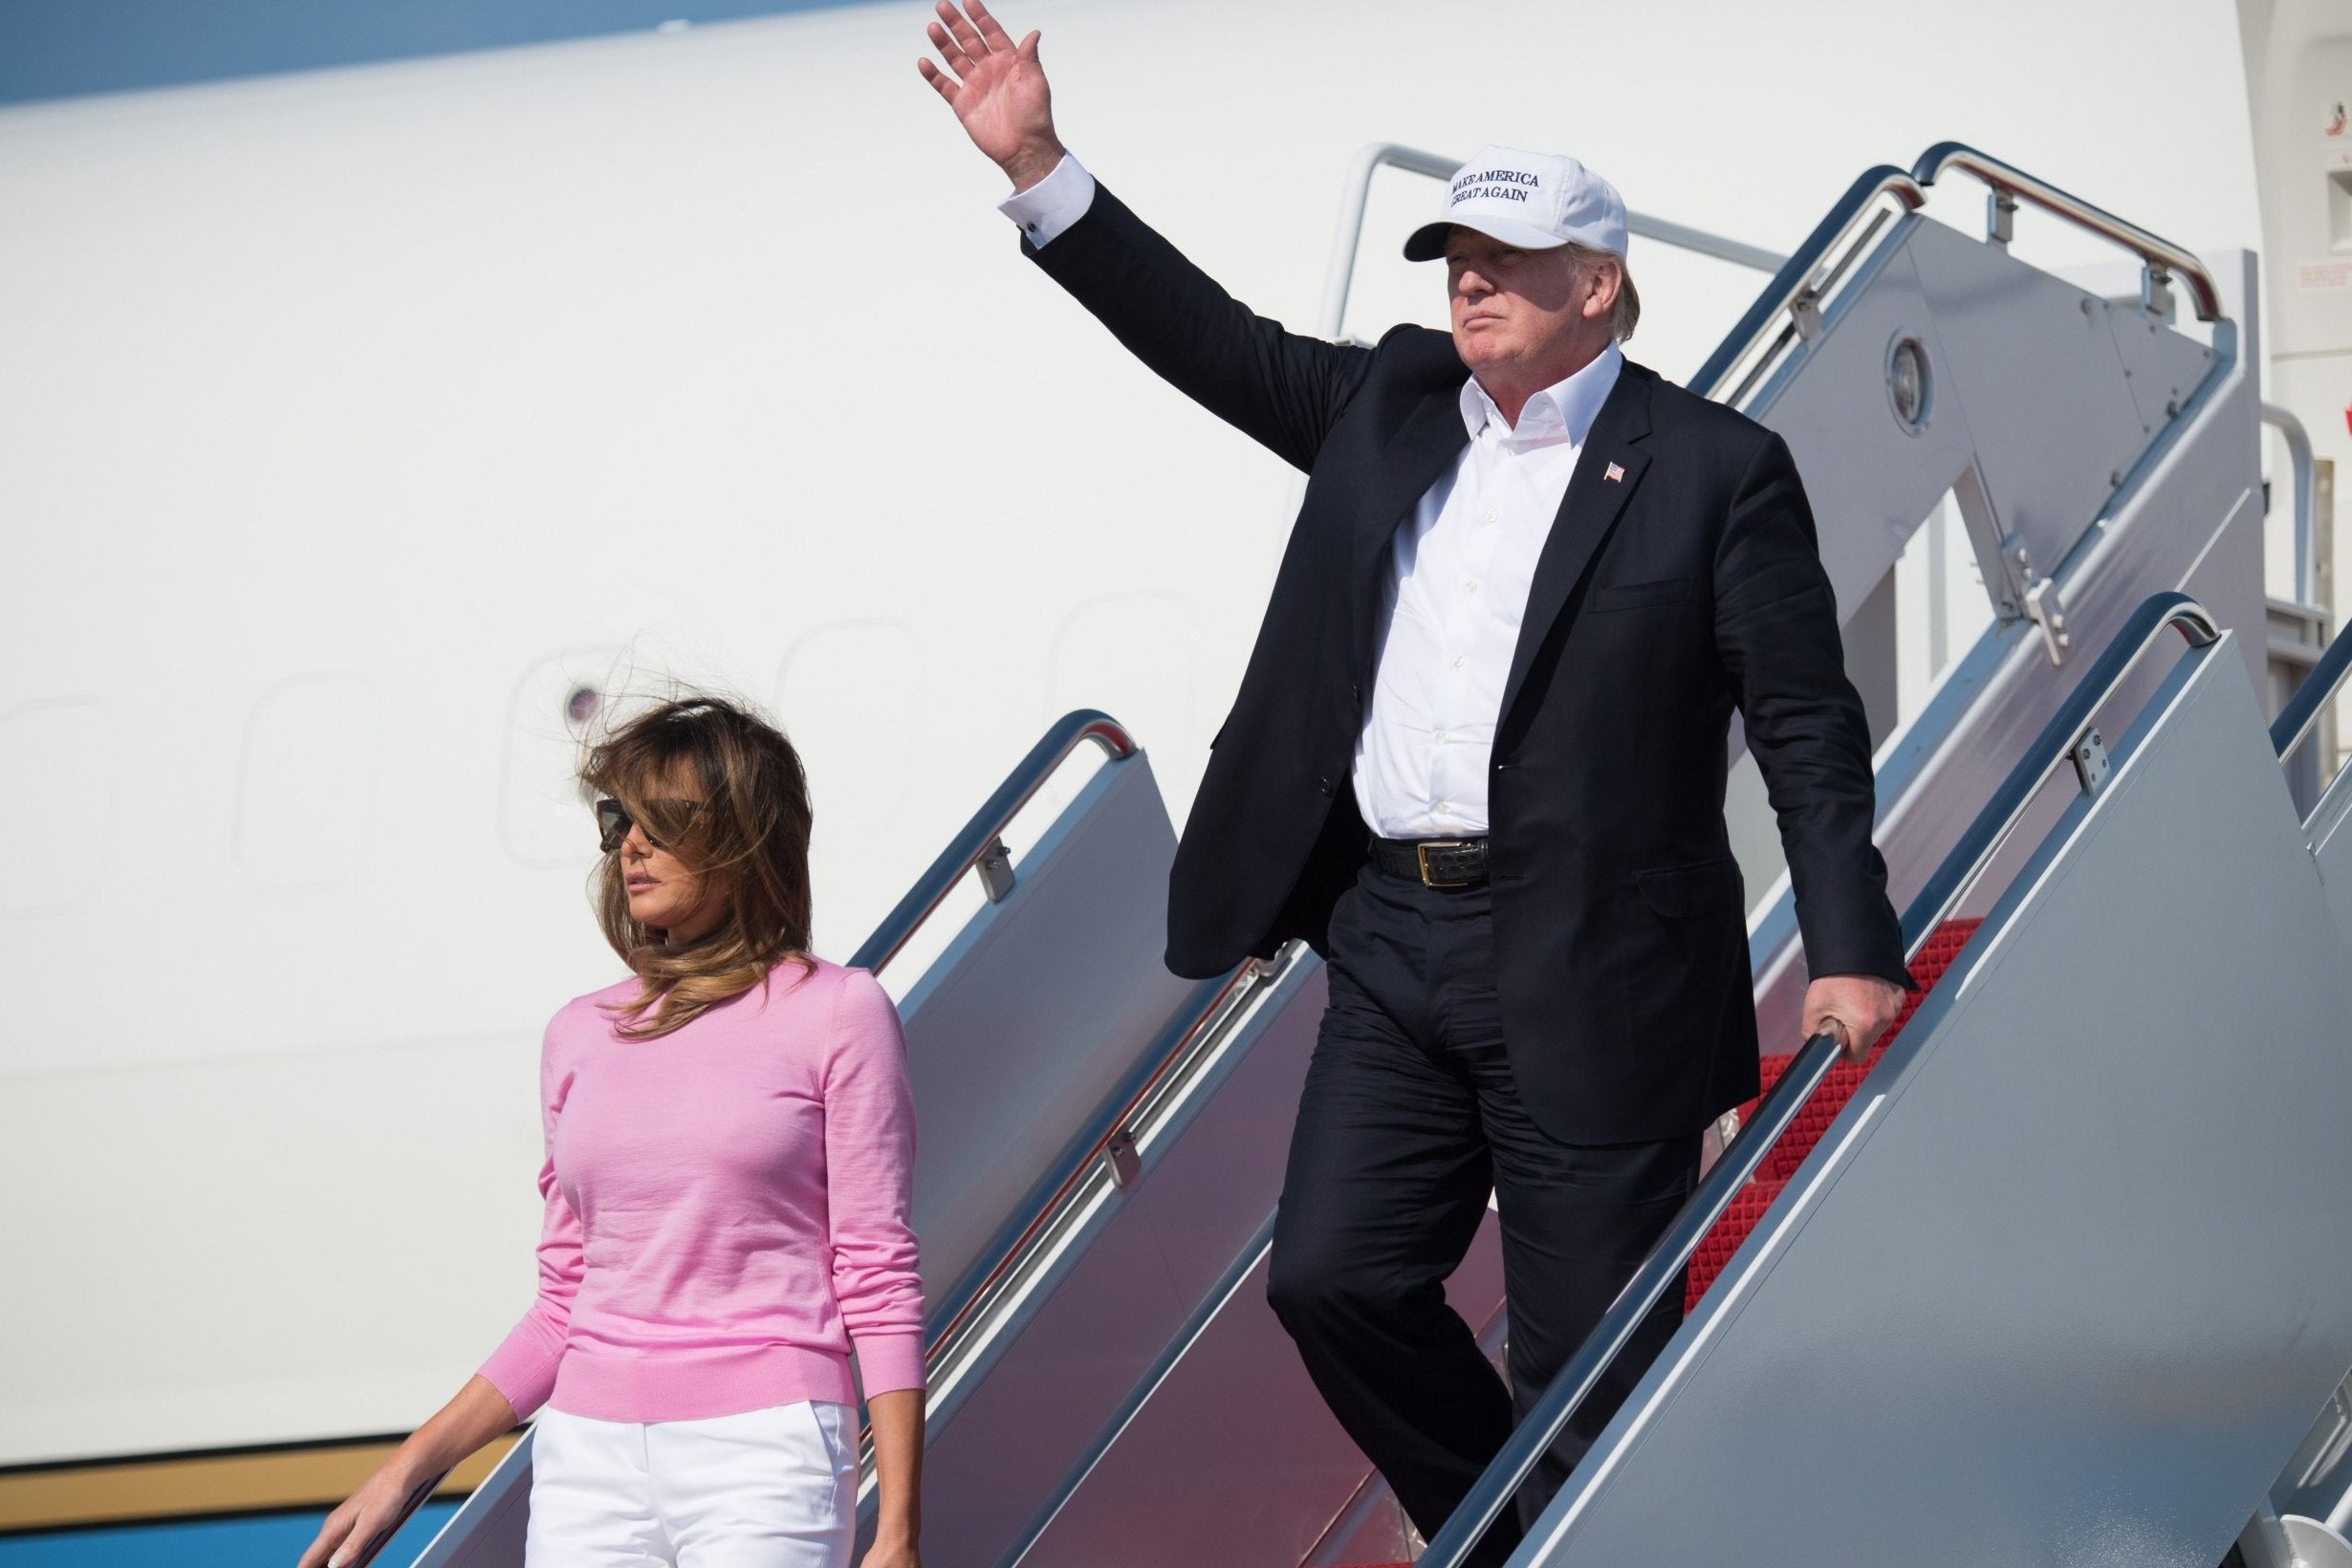 Donald Trump arriving in Washington on Sunday, with his wife Melania, after weekend trip